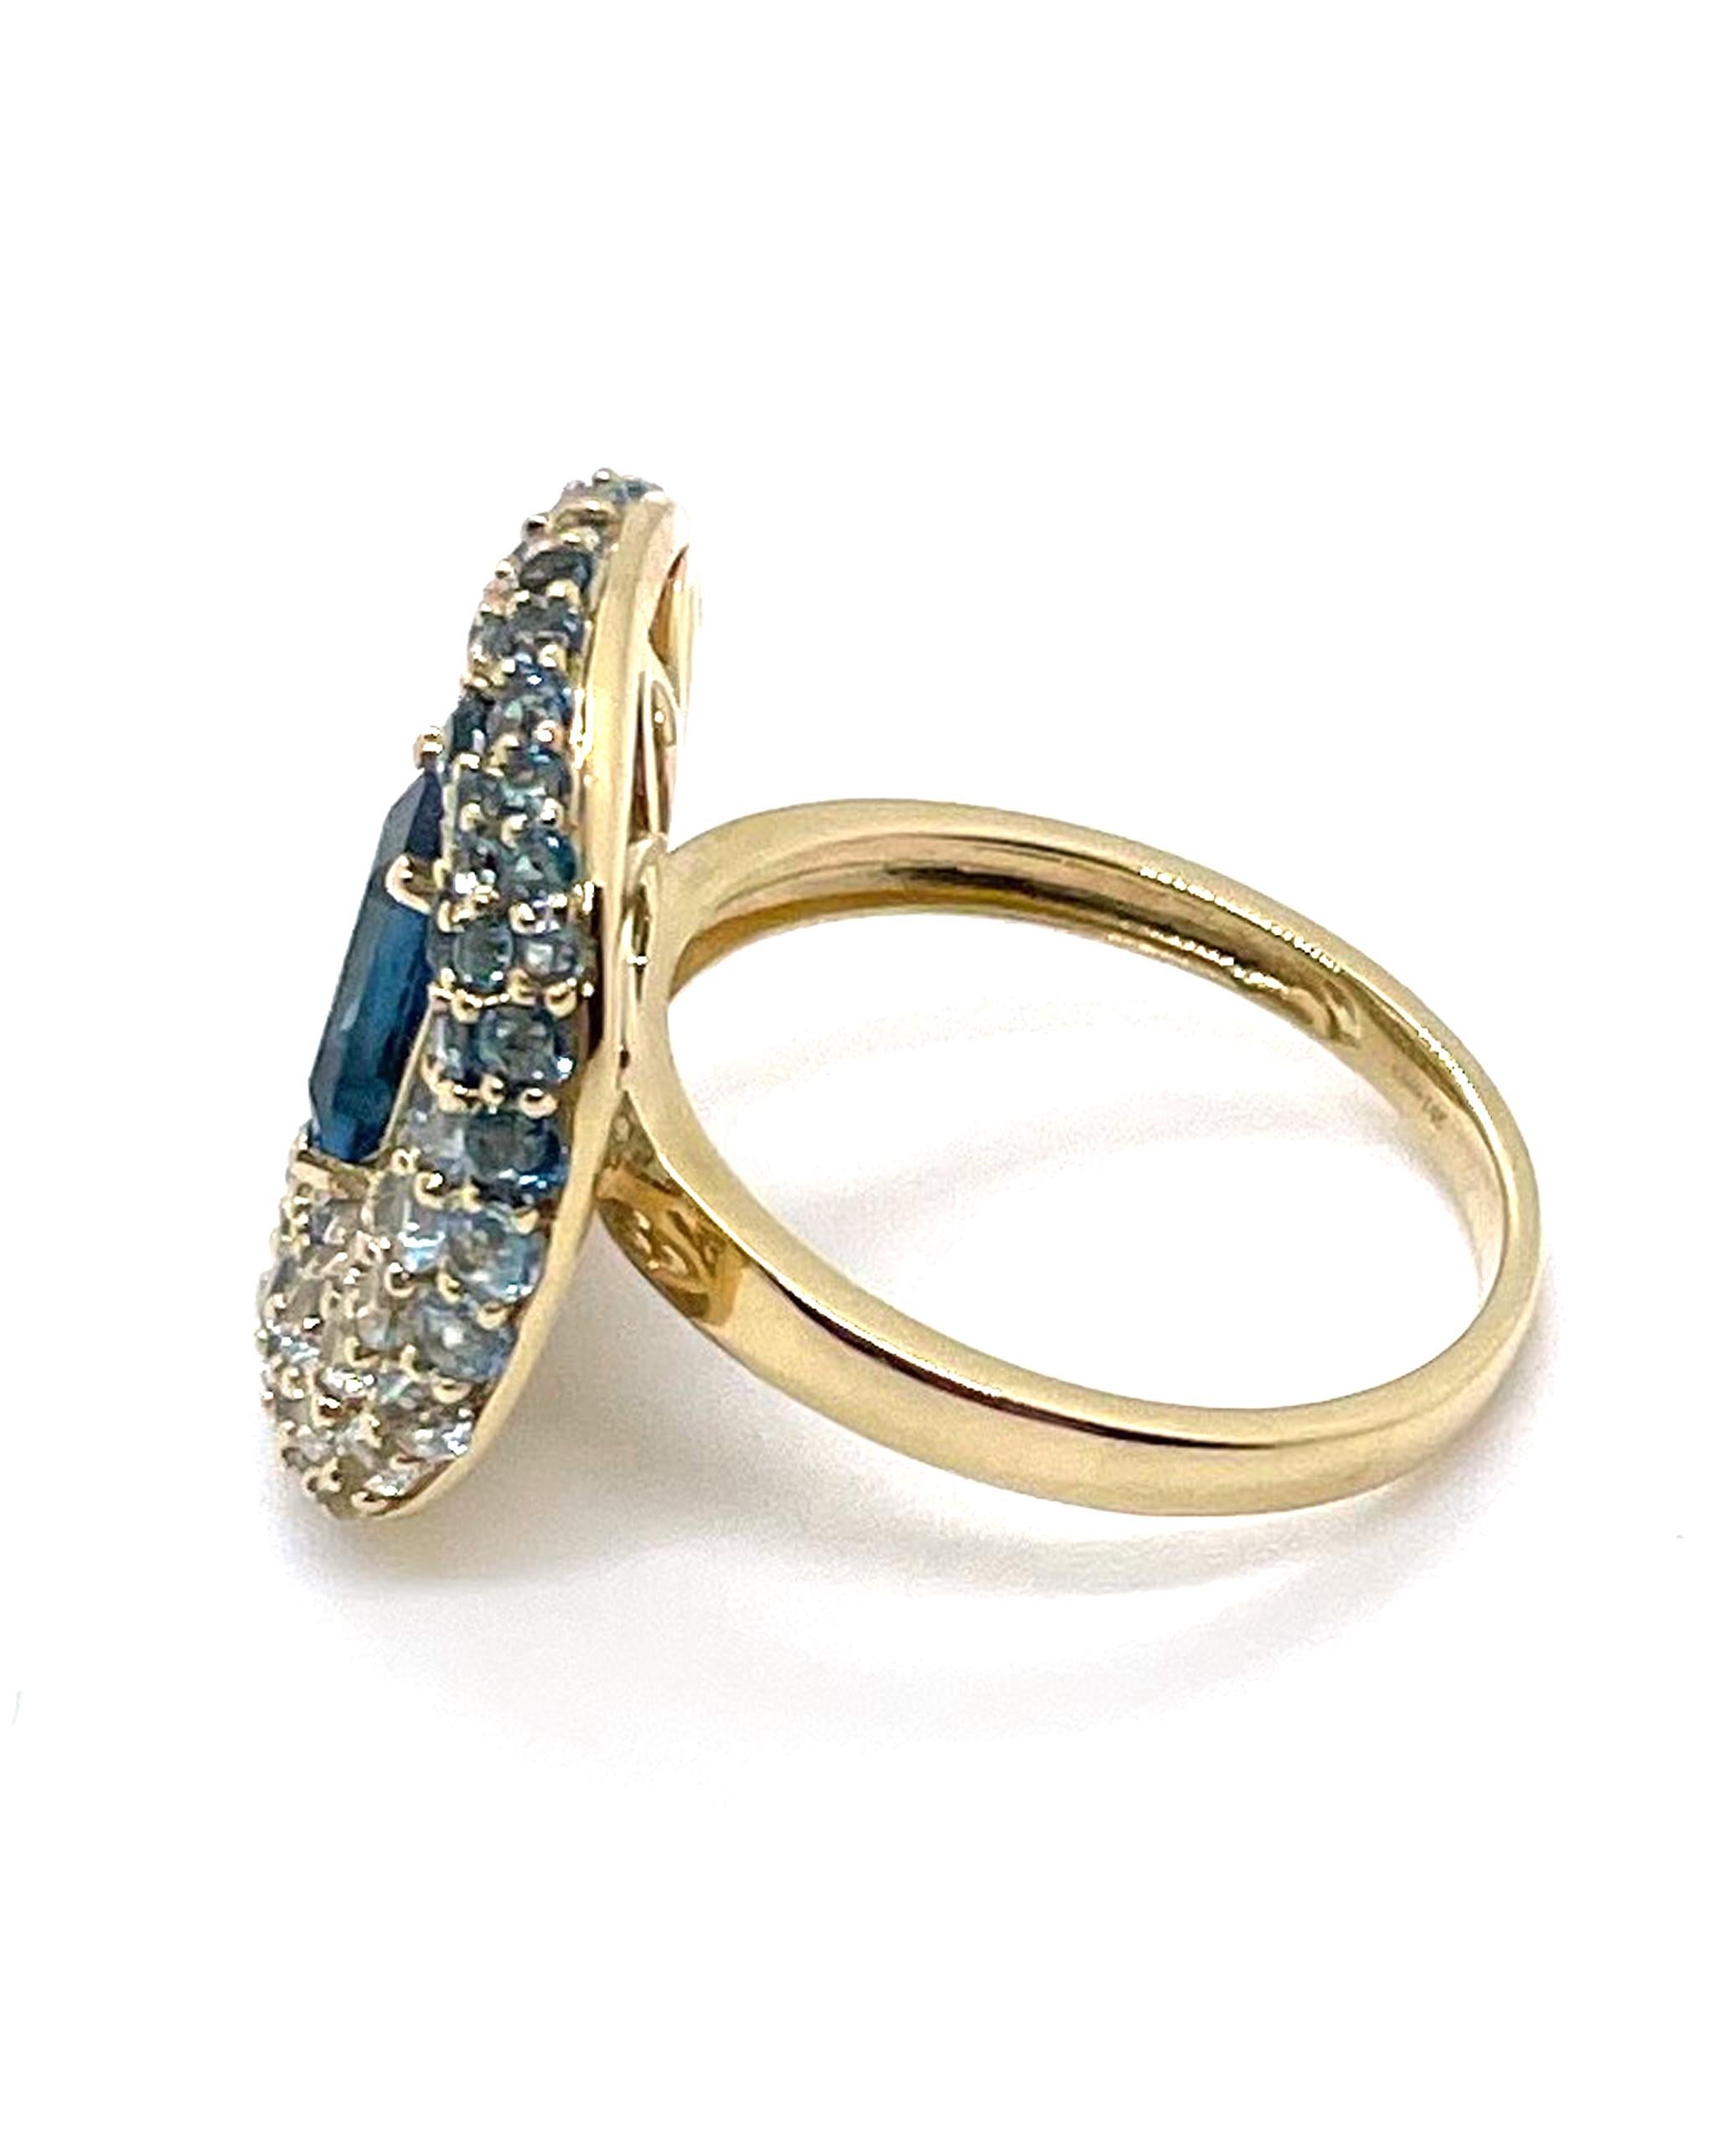 Contemporary 14K Yellow Gold Blue Topaz Cocktail Ring